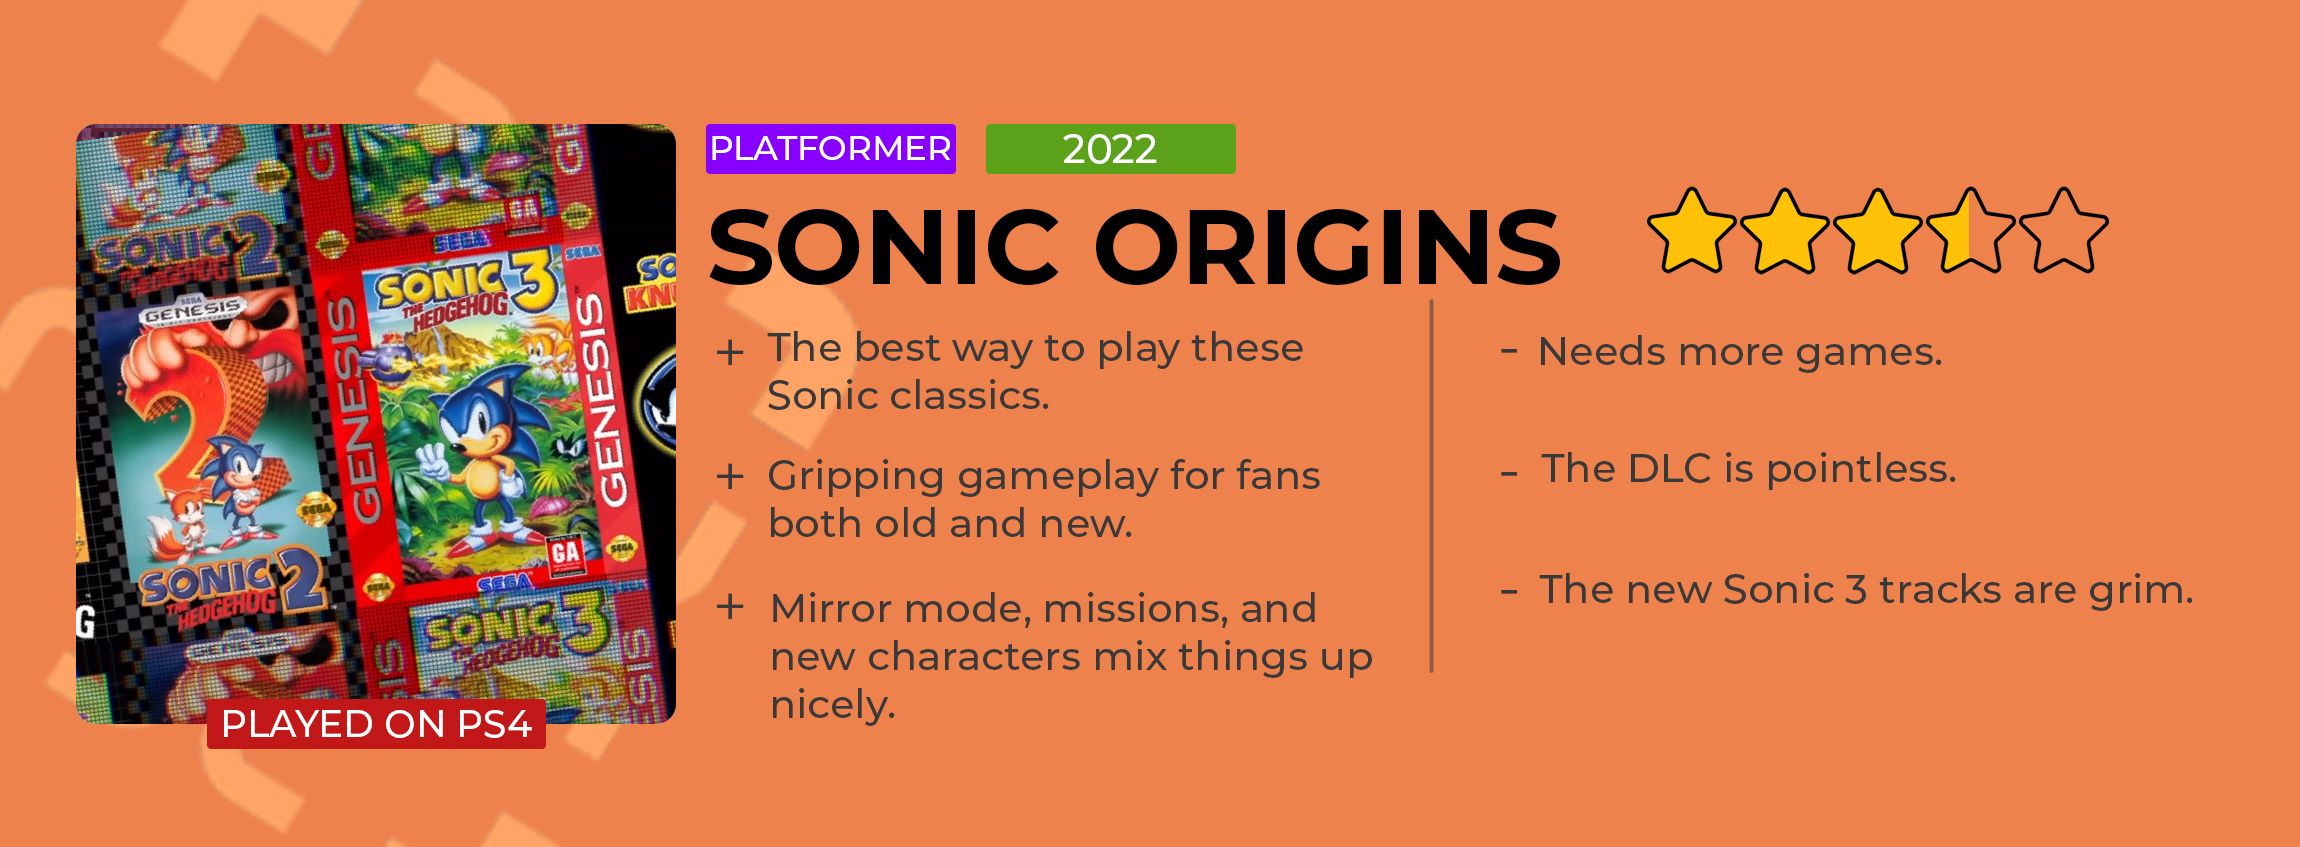 A list of pros and cons about Sonic Origins, which I gave 3.5 out of 5 stars. Pros: the gameplay, the quality, and the new missions. Cons: not enough games, the DLC is bad, and the new music sucks. 